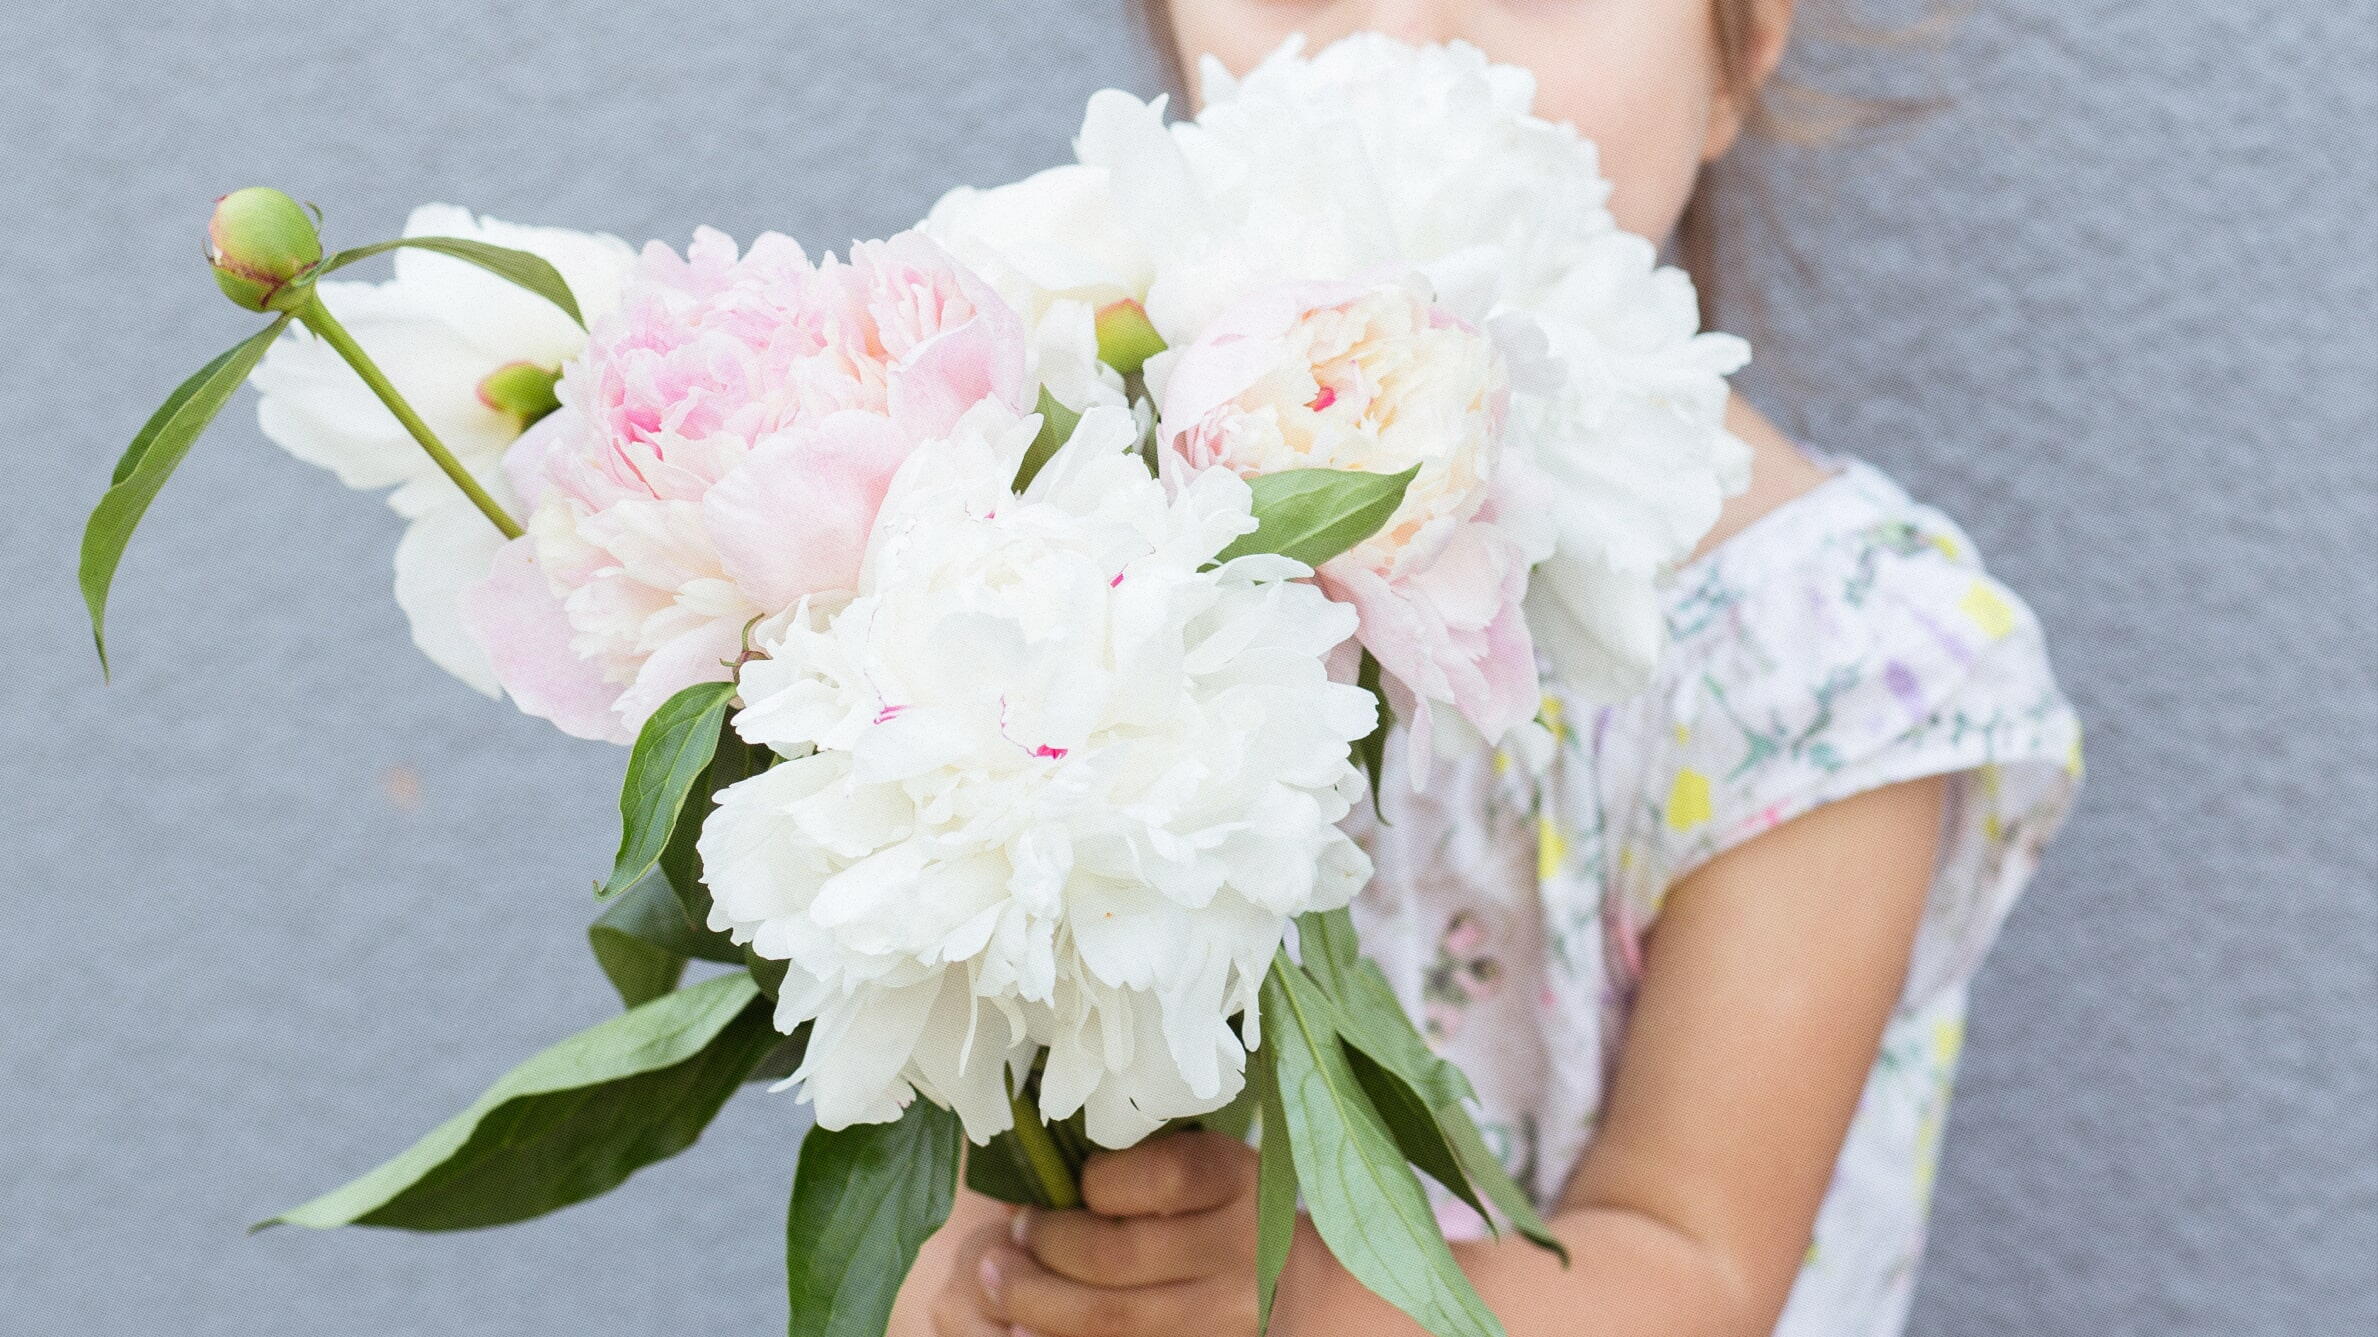 When to give peony flowers